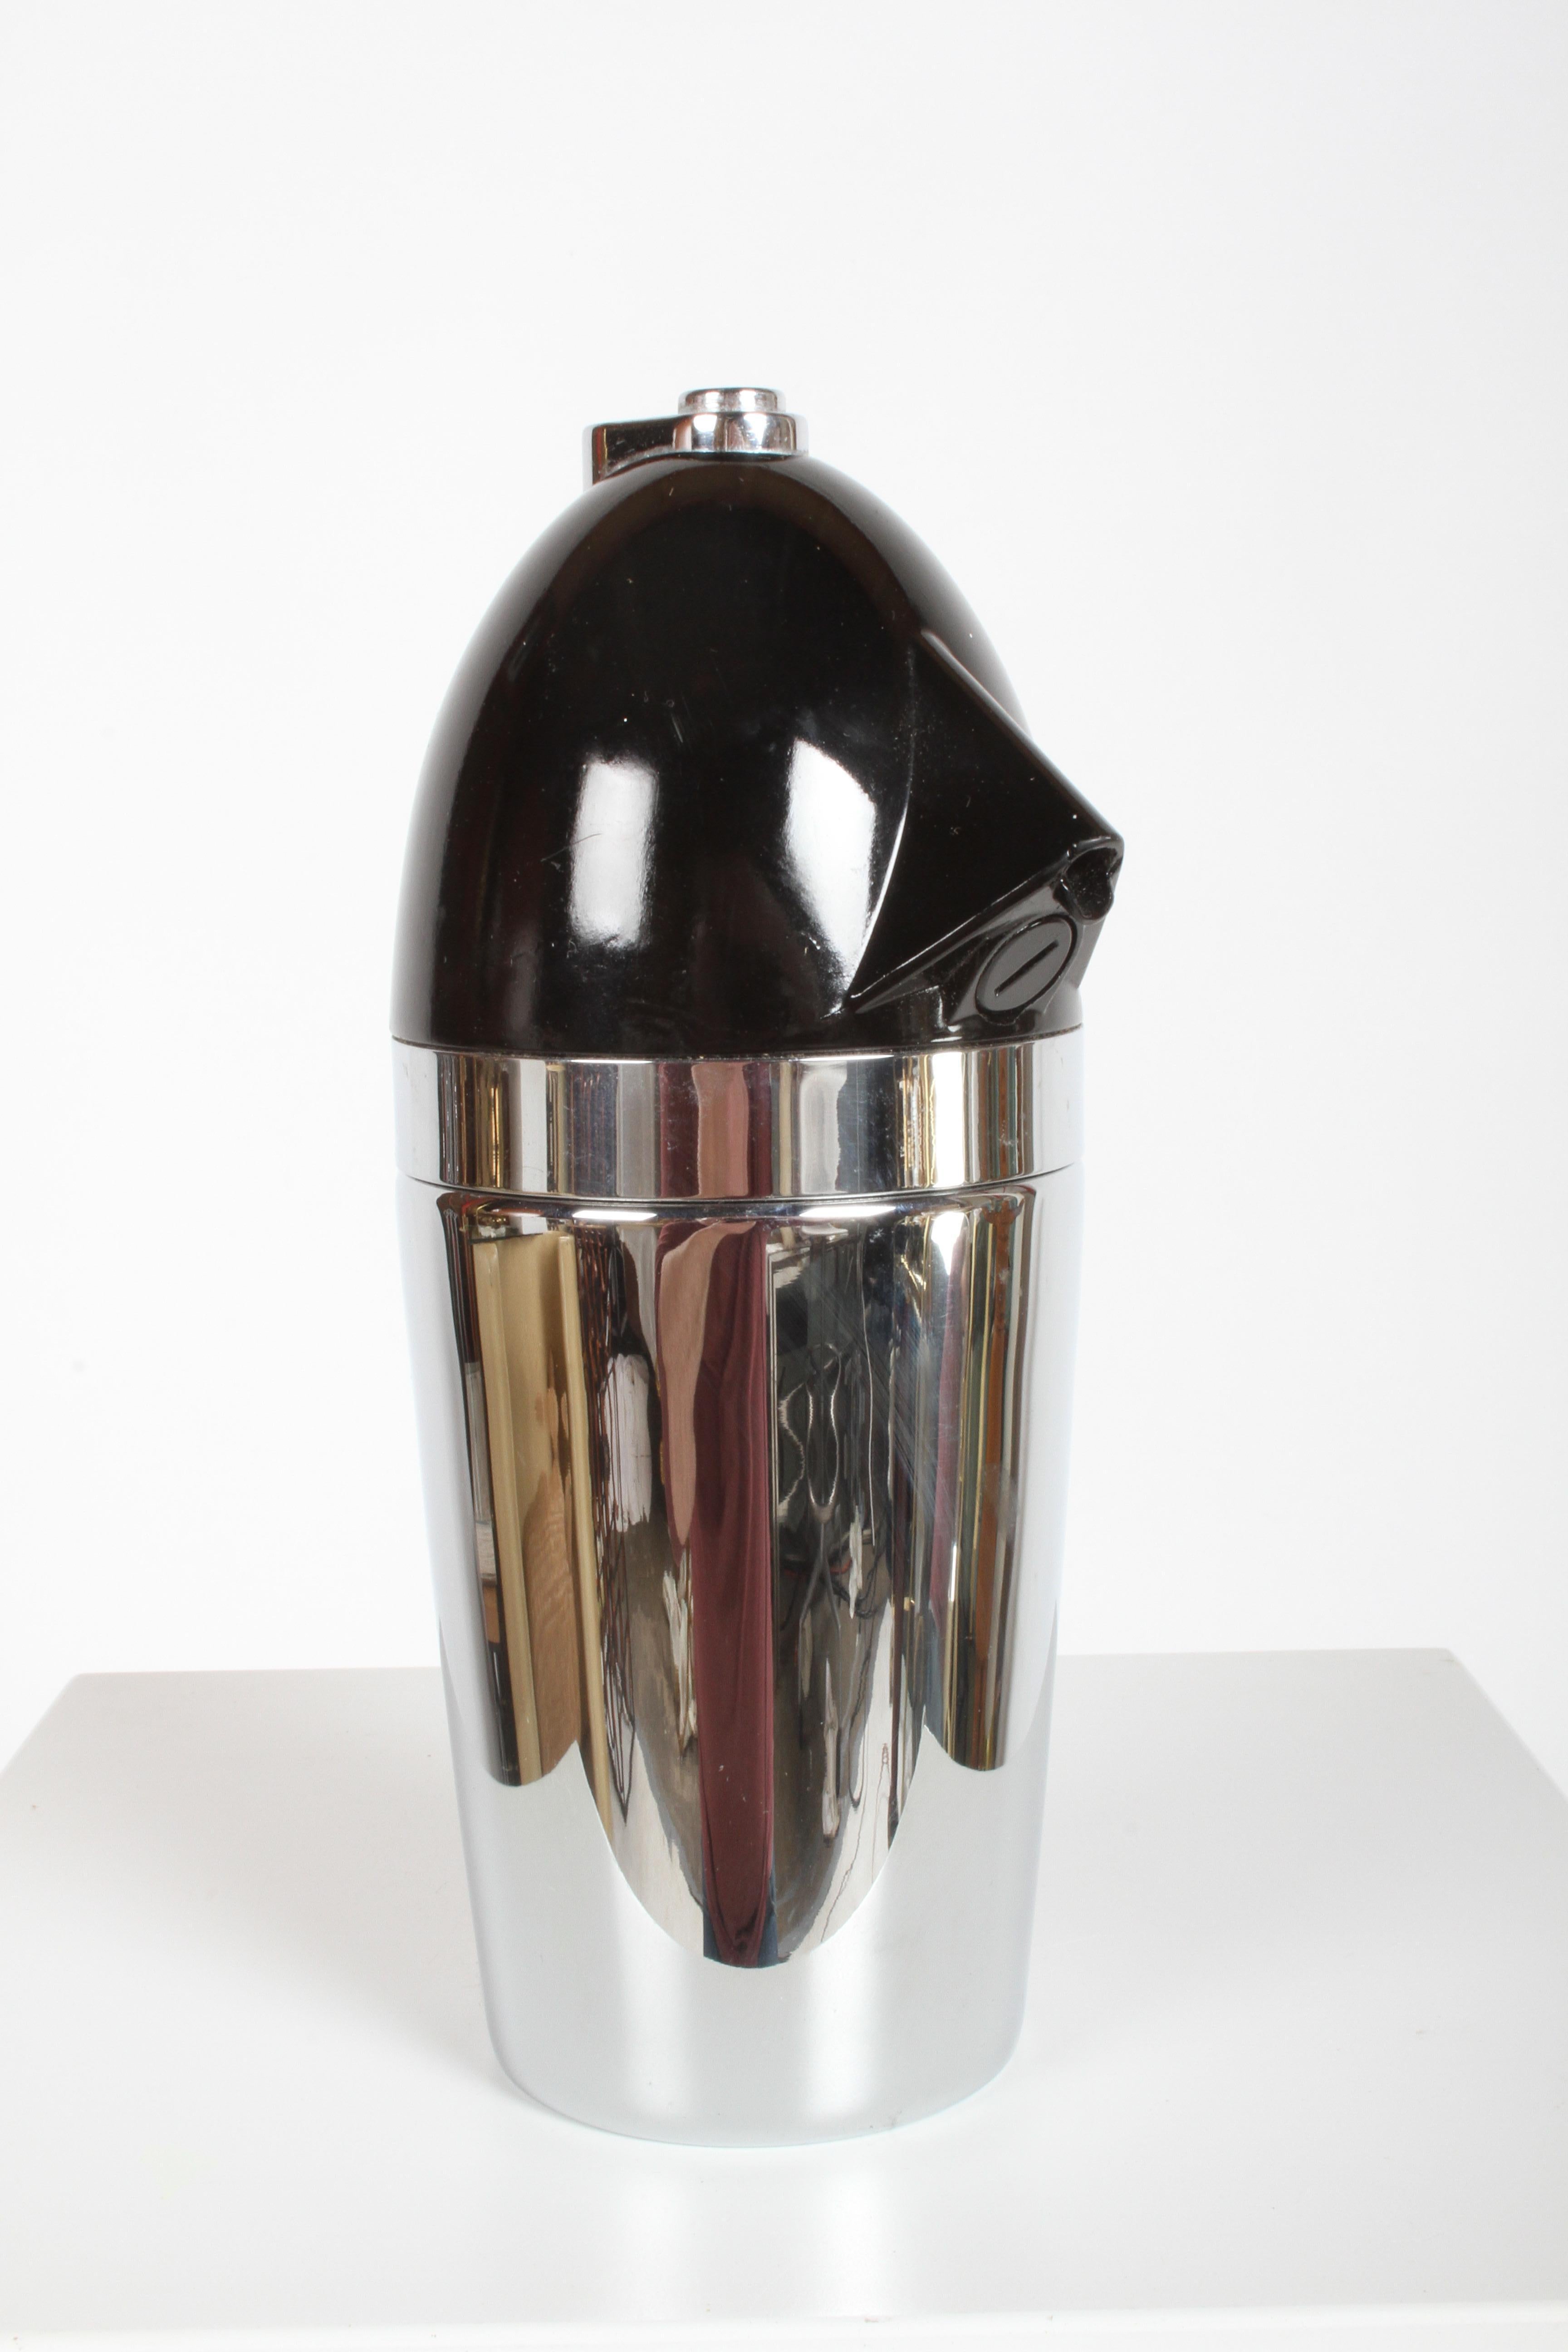 Norman Bel Geddes Soda King Rechargeable Syphon circa 1938, Unused For Sale 6